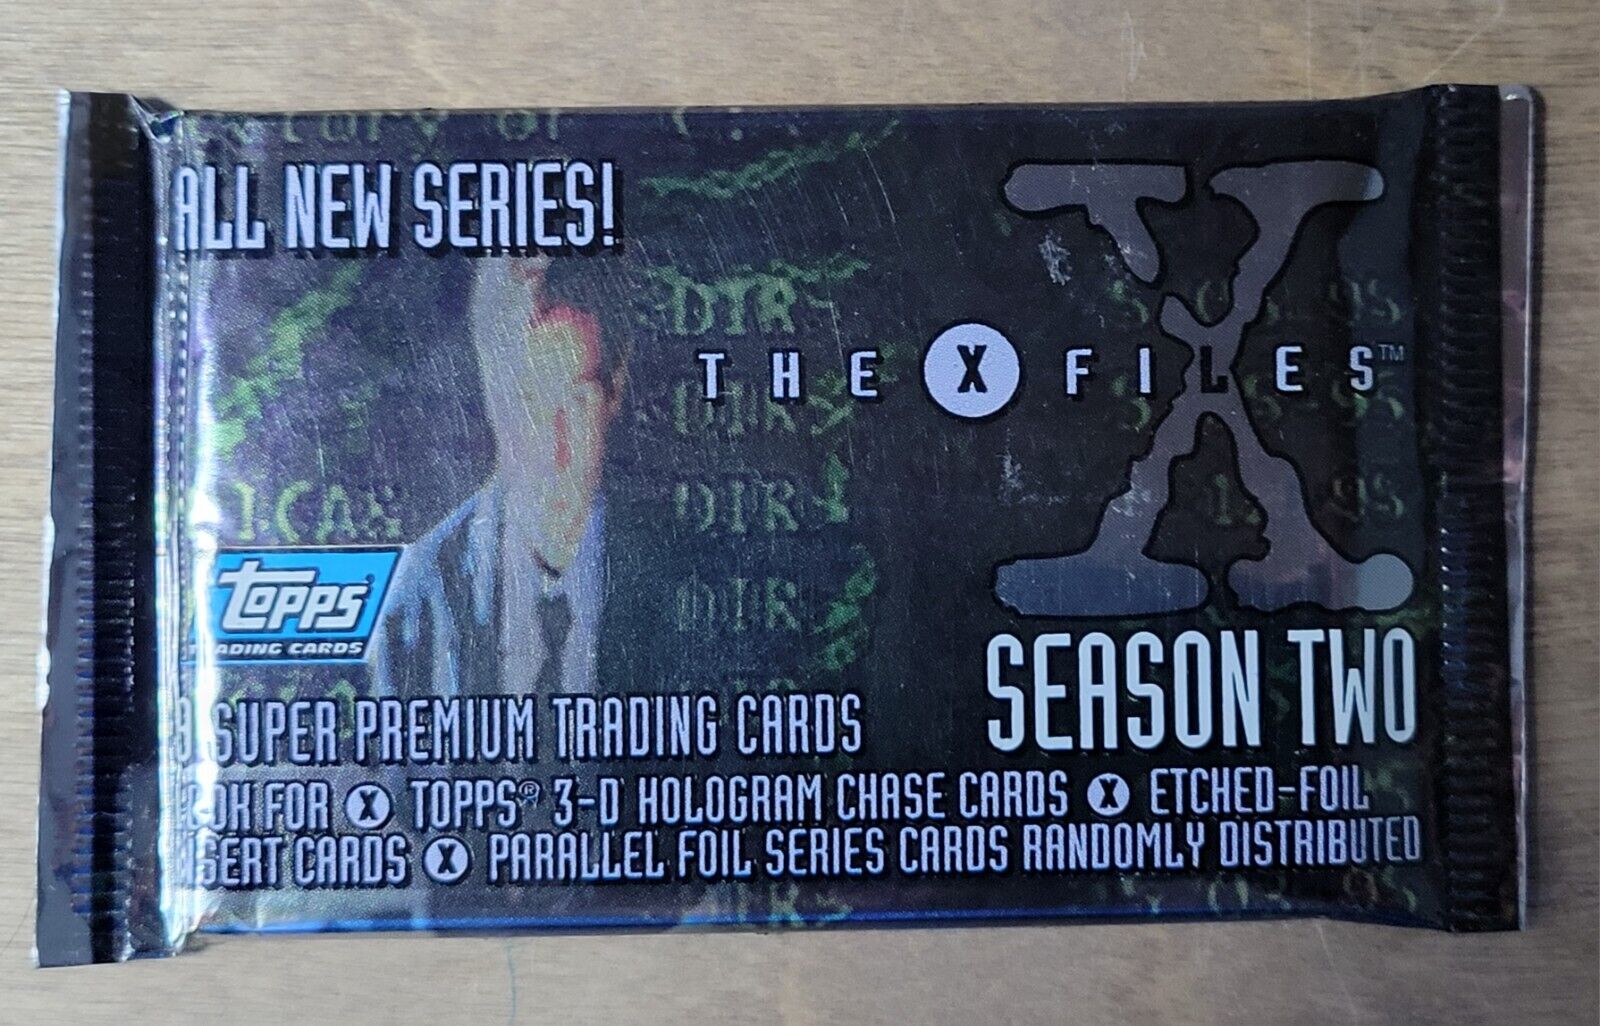 1996 Topps The XFiles Season 2 Trading Cards (1) Foil Pack New Factory Sealed